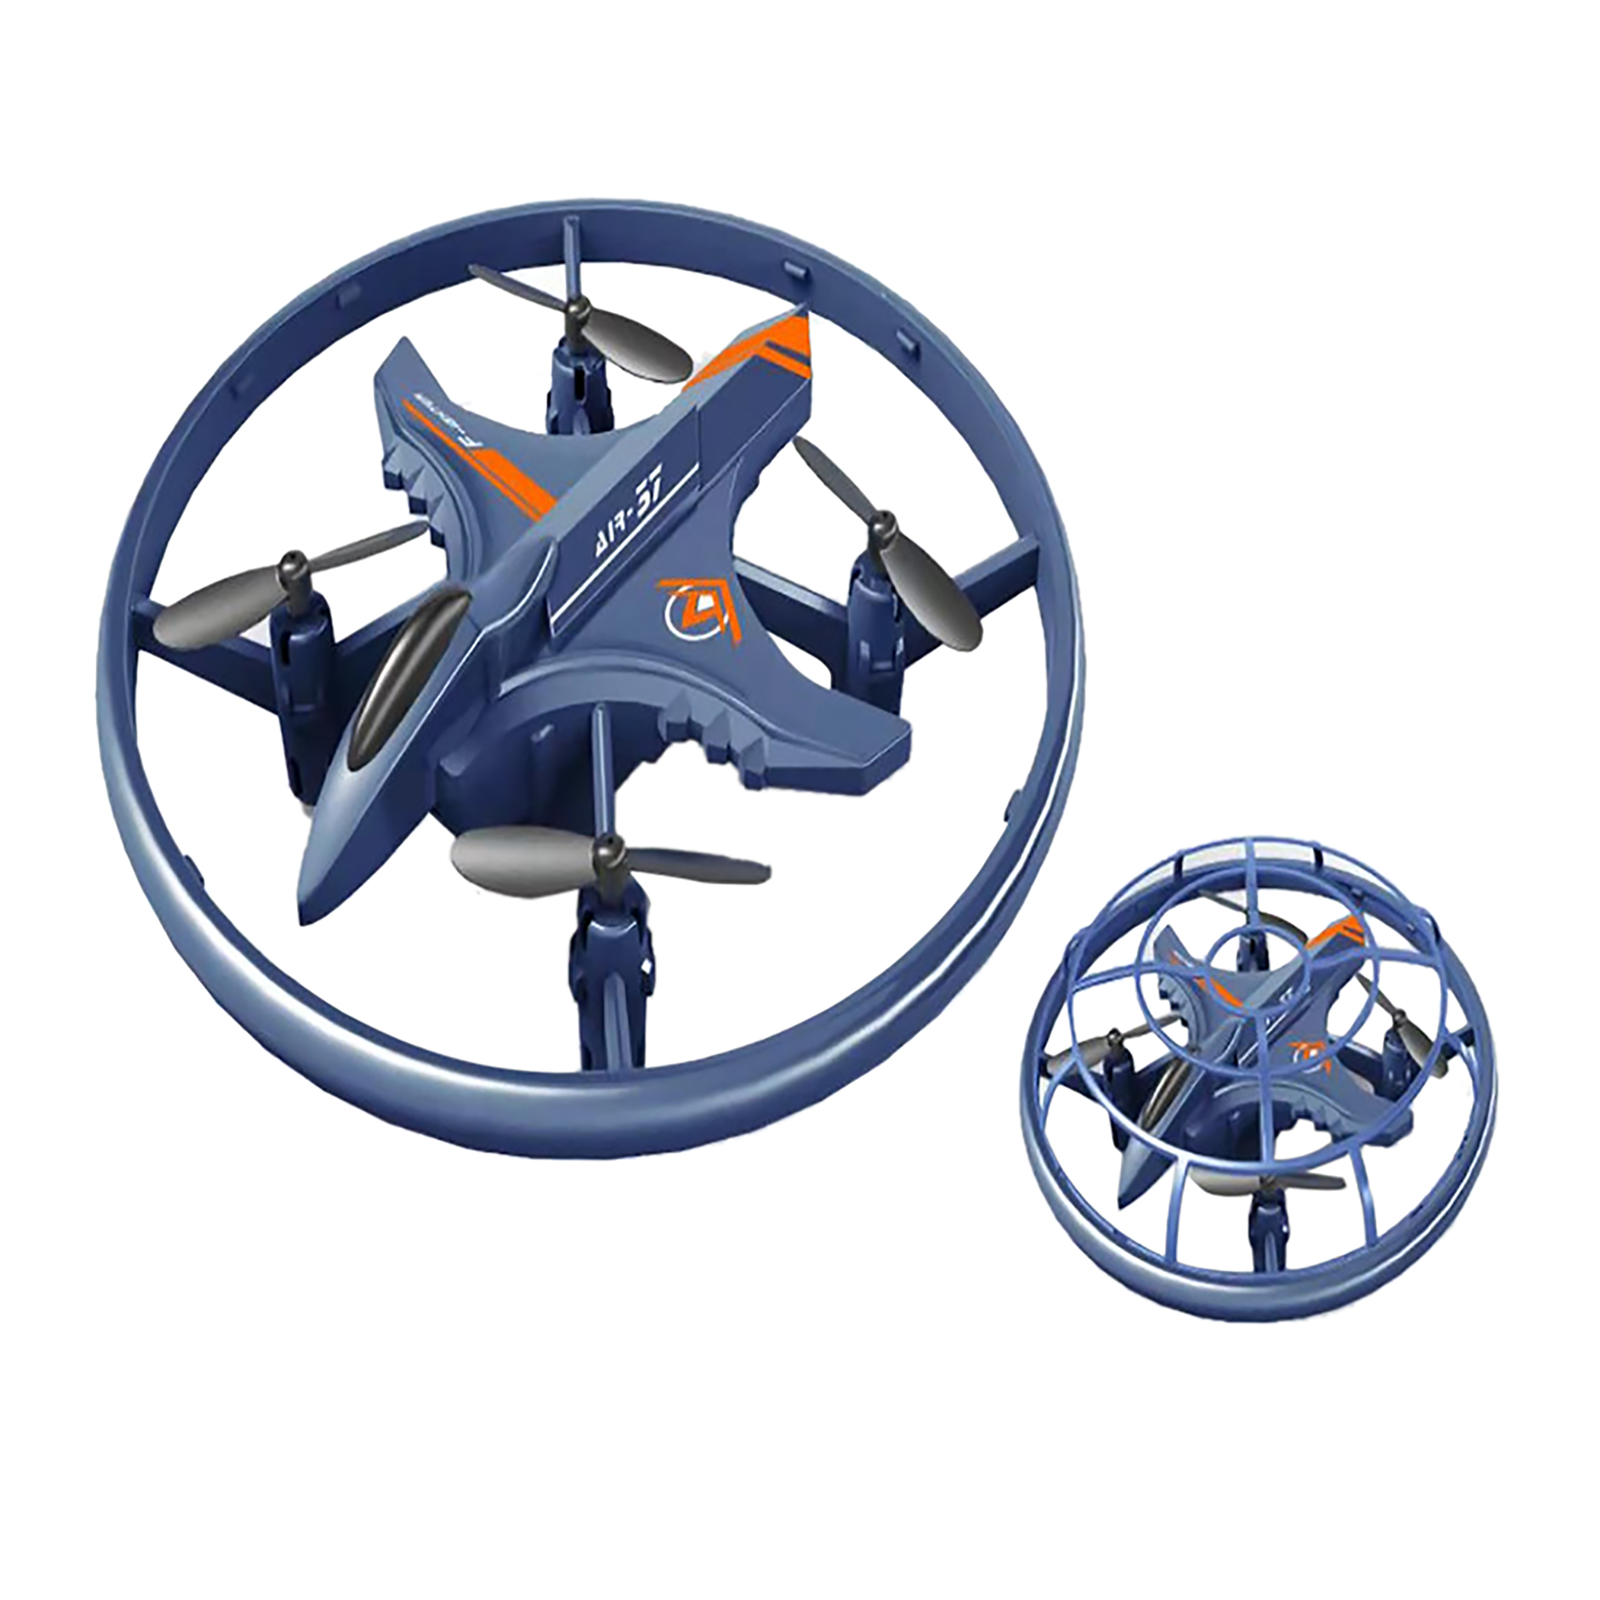 Mini RC Drone with LED Light 2.4g 360 Degree Rotation Headless Mode Fixed Altitude Remote Control Quadcopter